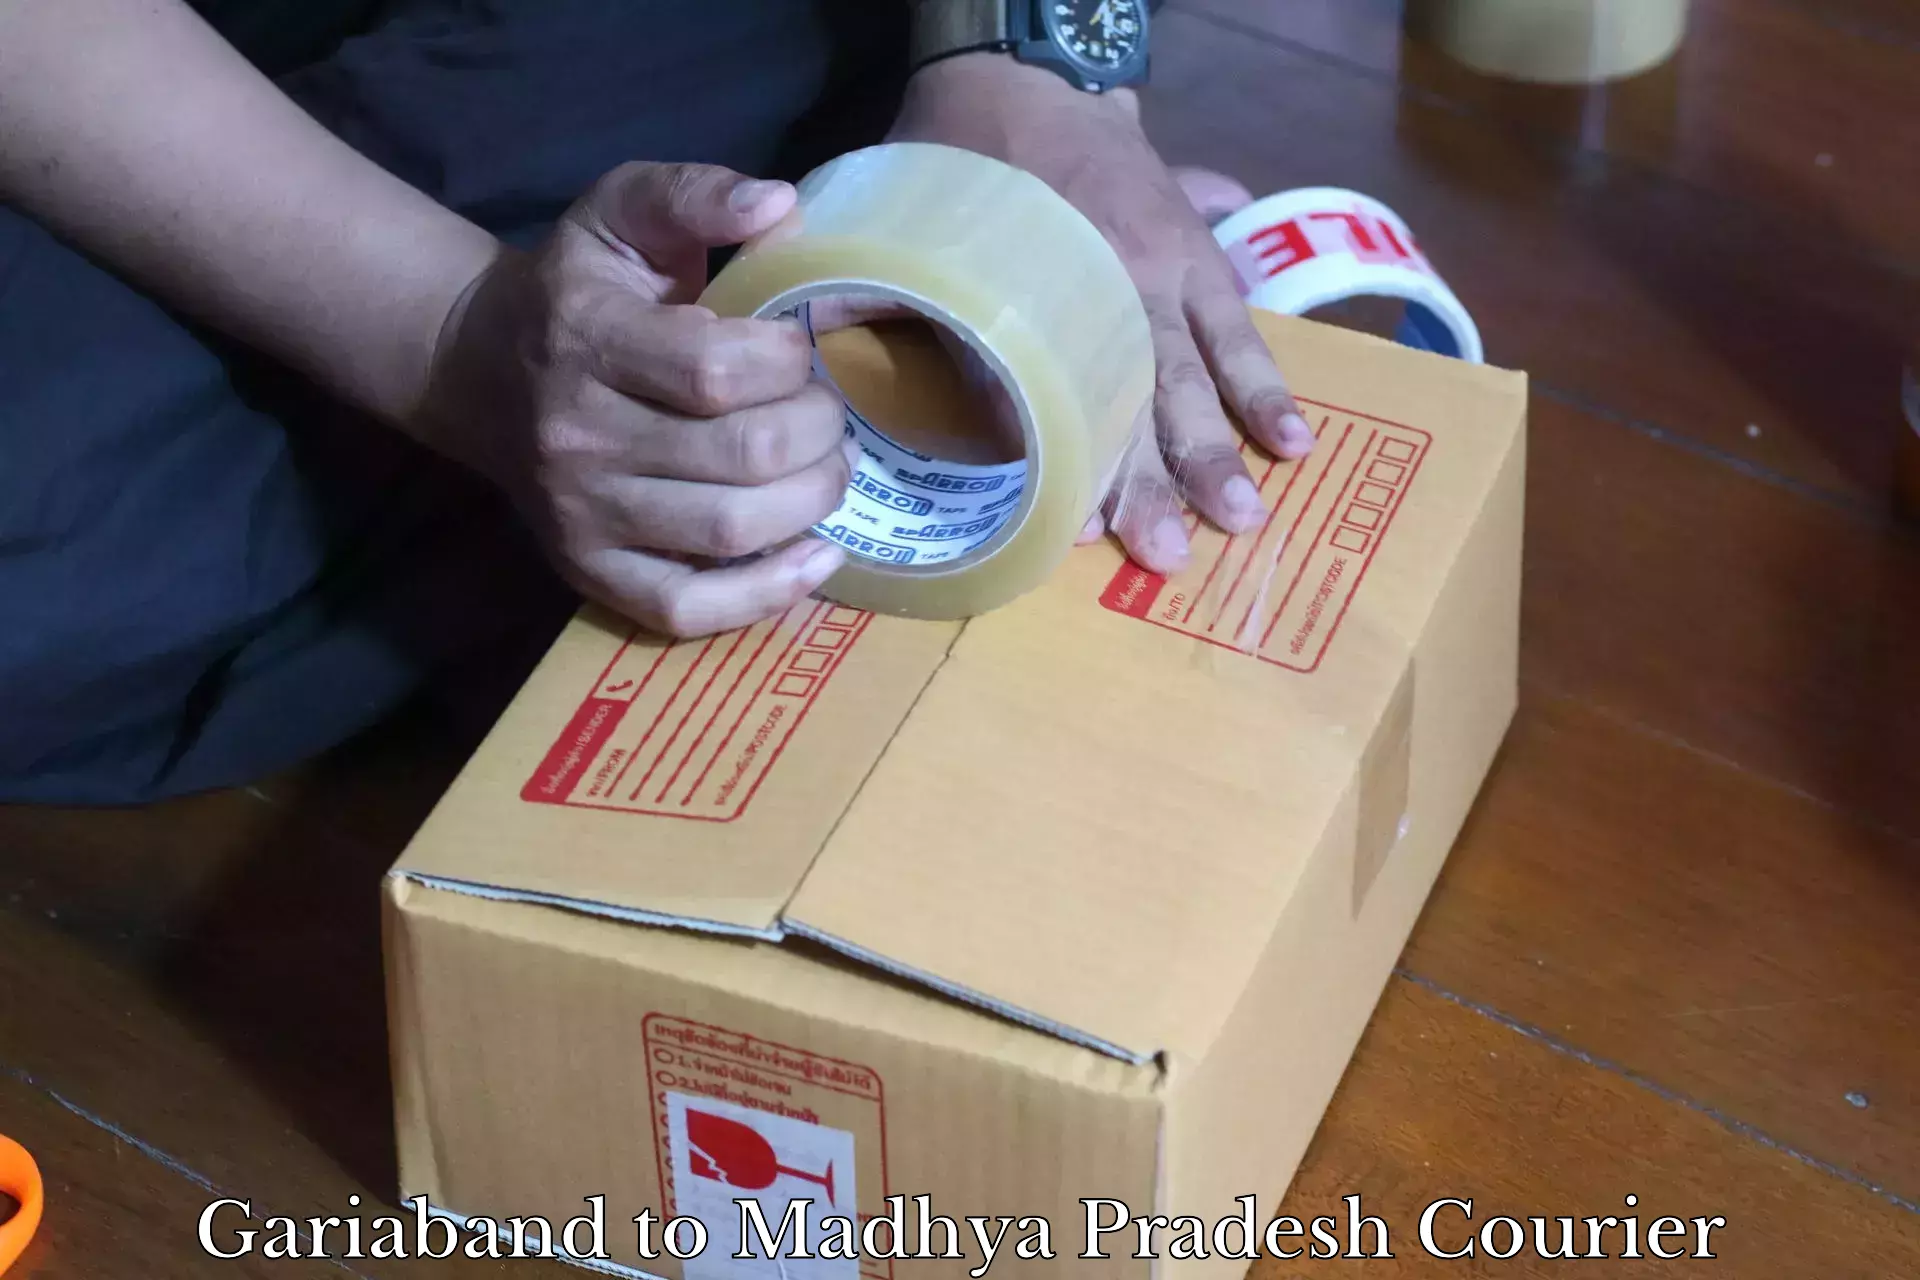 Courier service innovation Gariaband to Sanawad